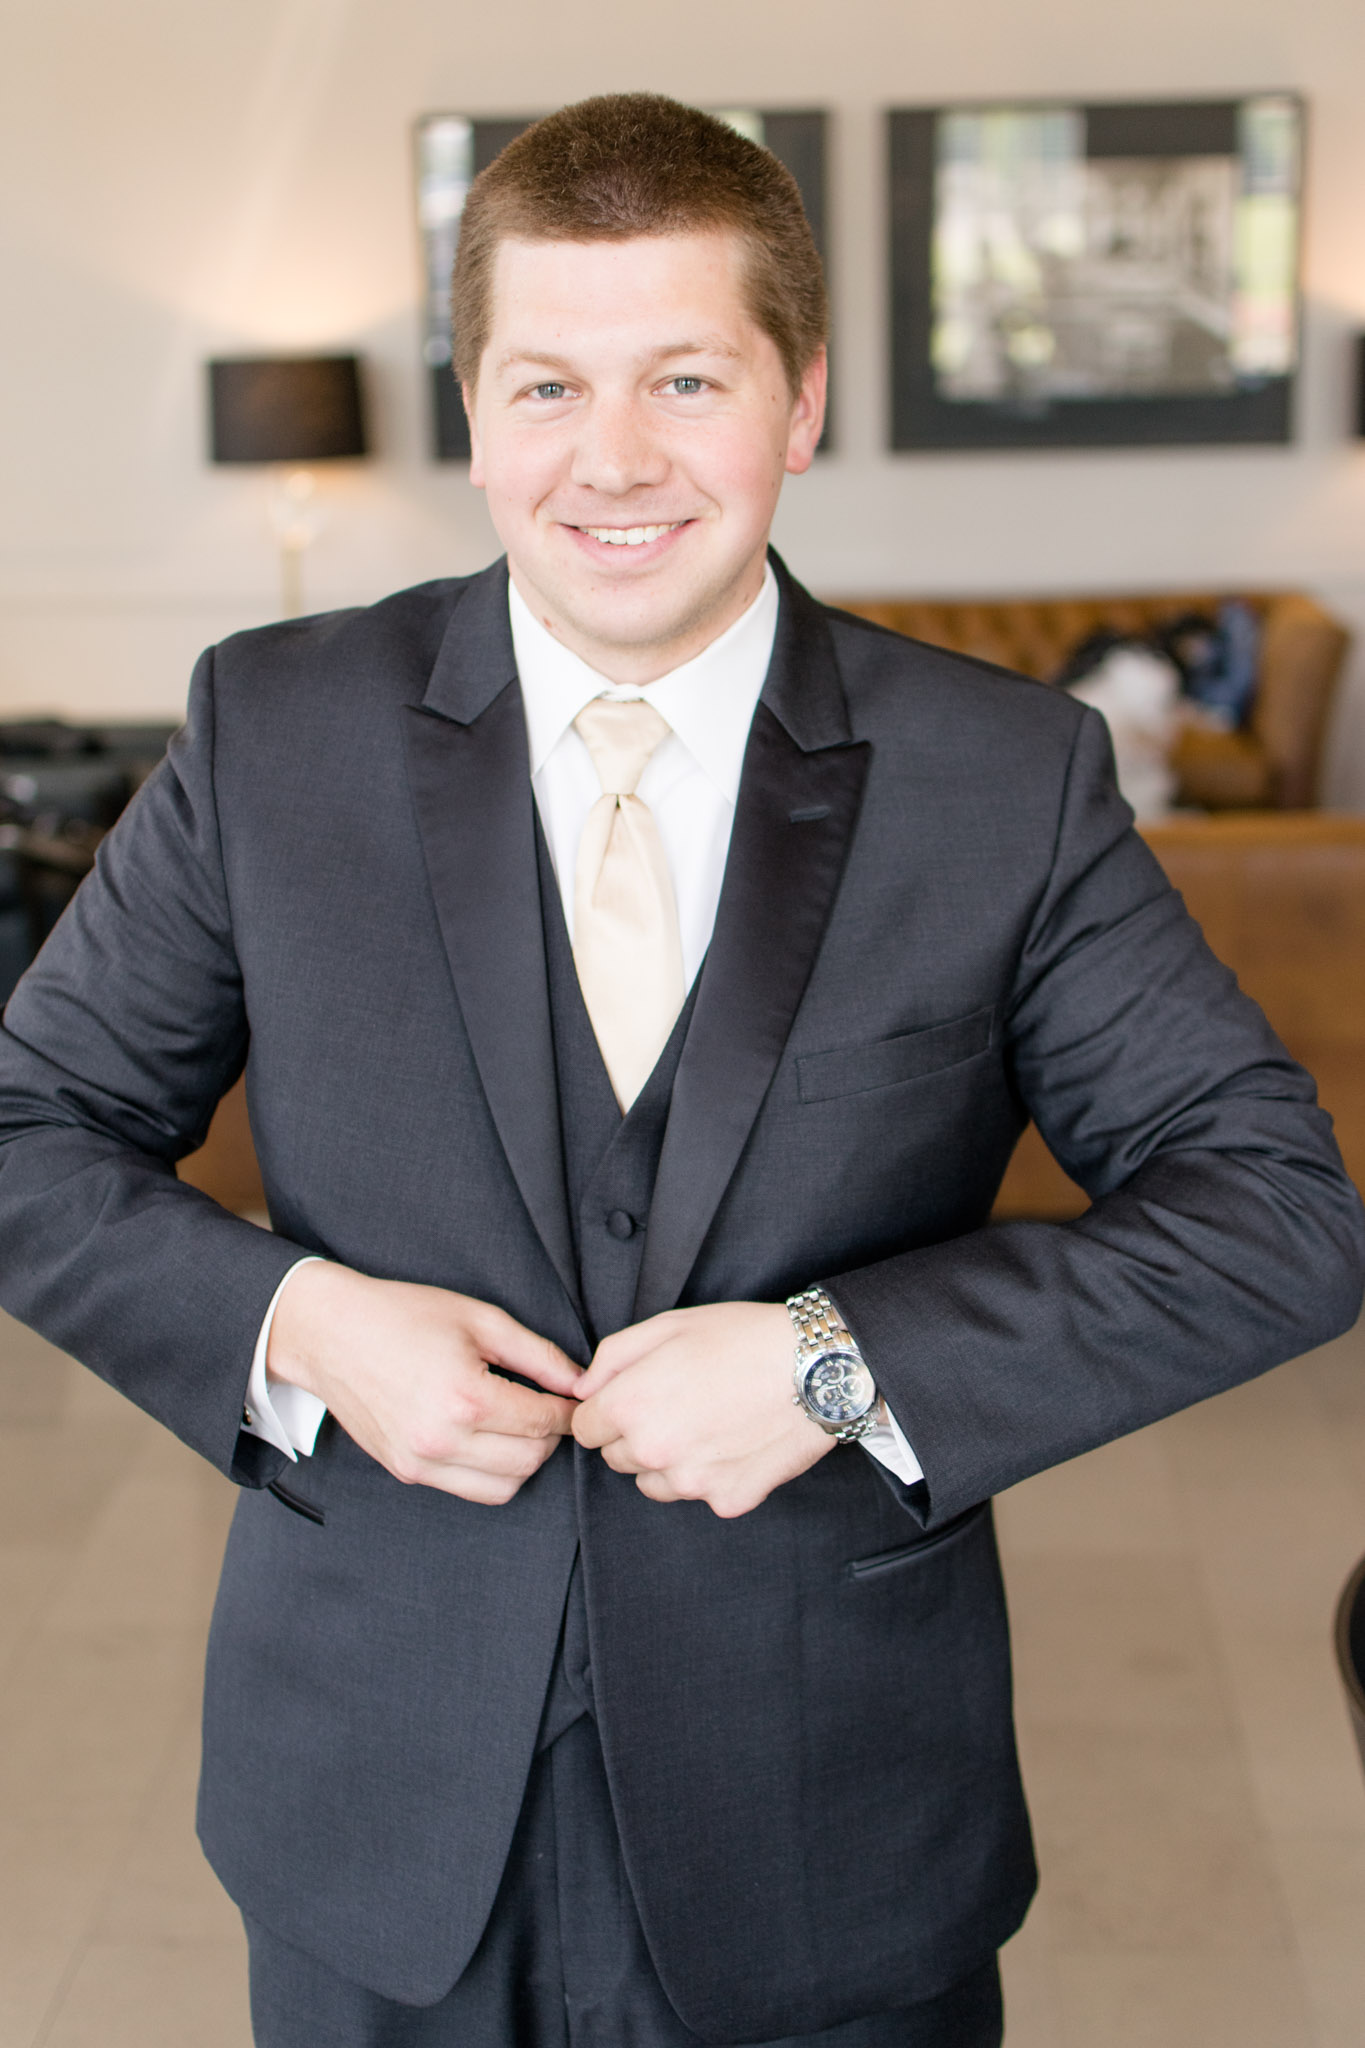 Indianapolis Groom smiles at camera while buttoning jacket